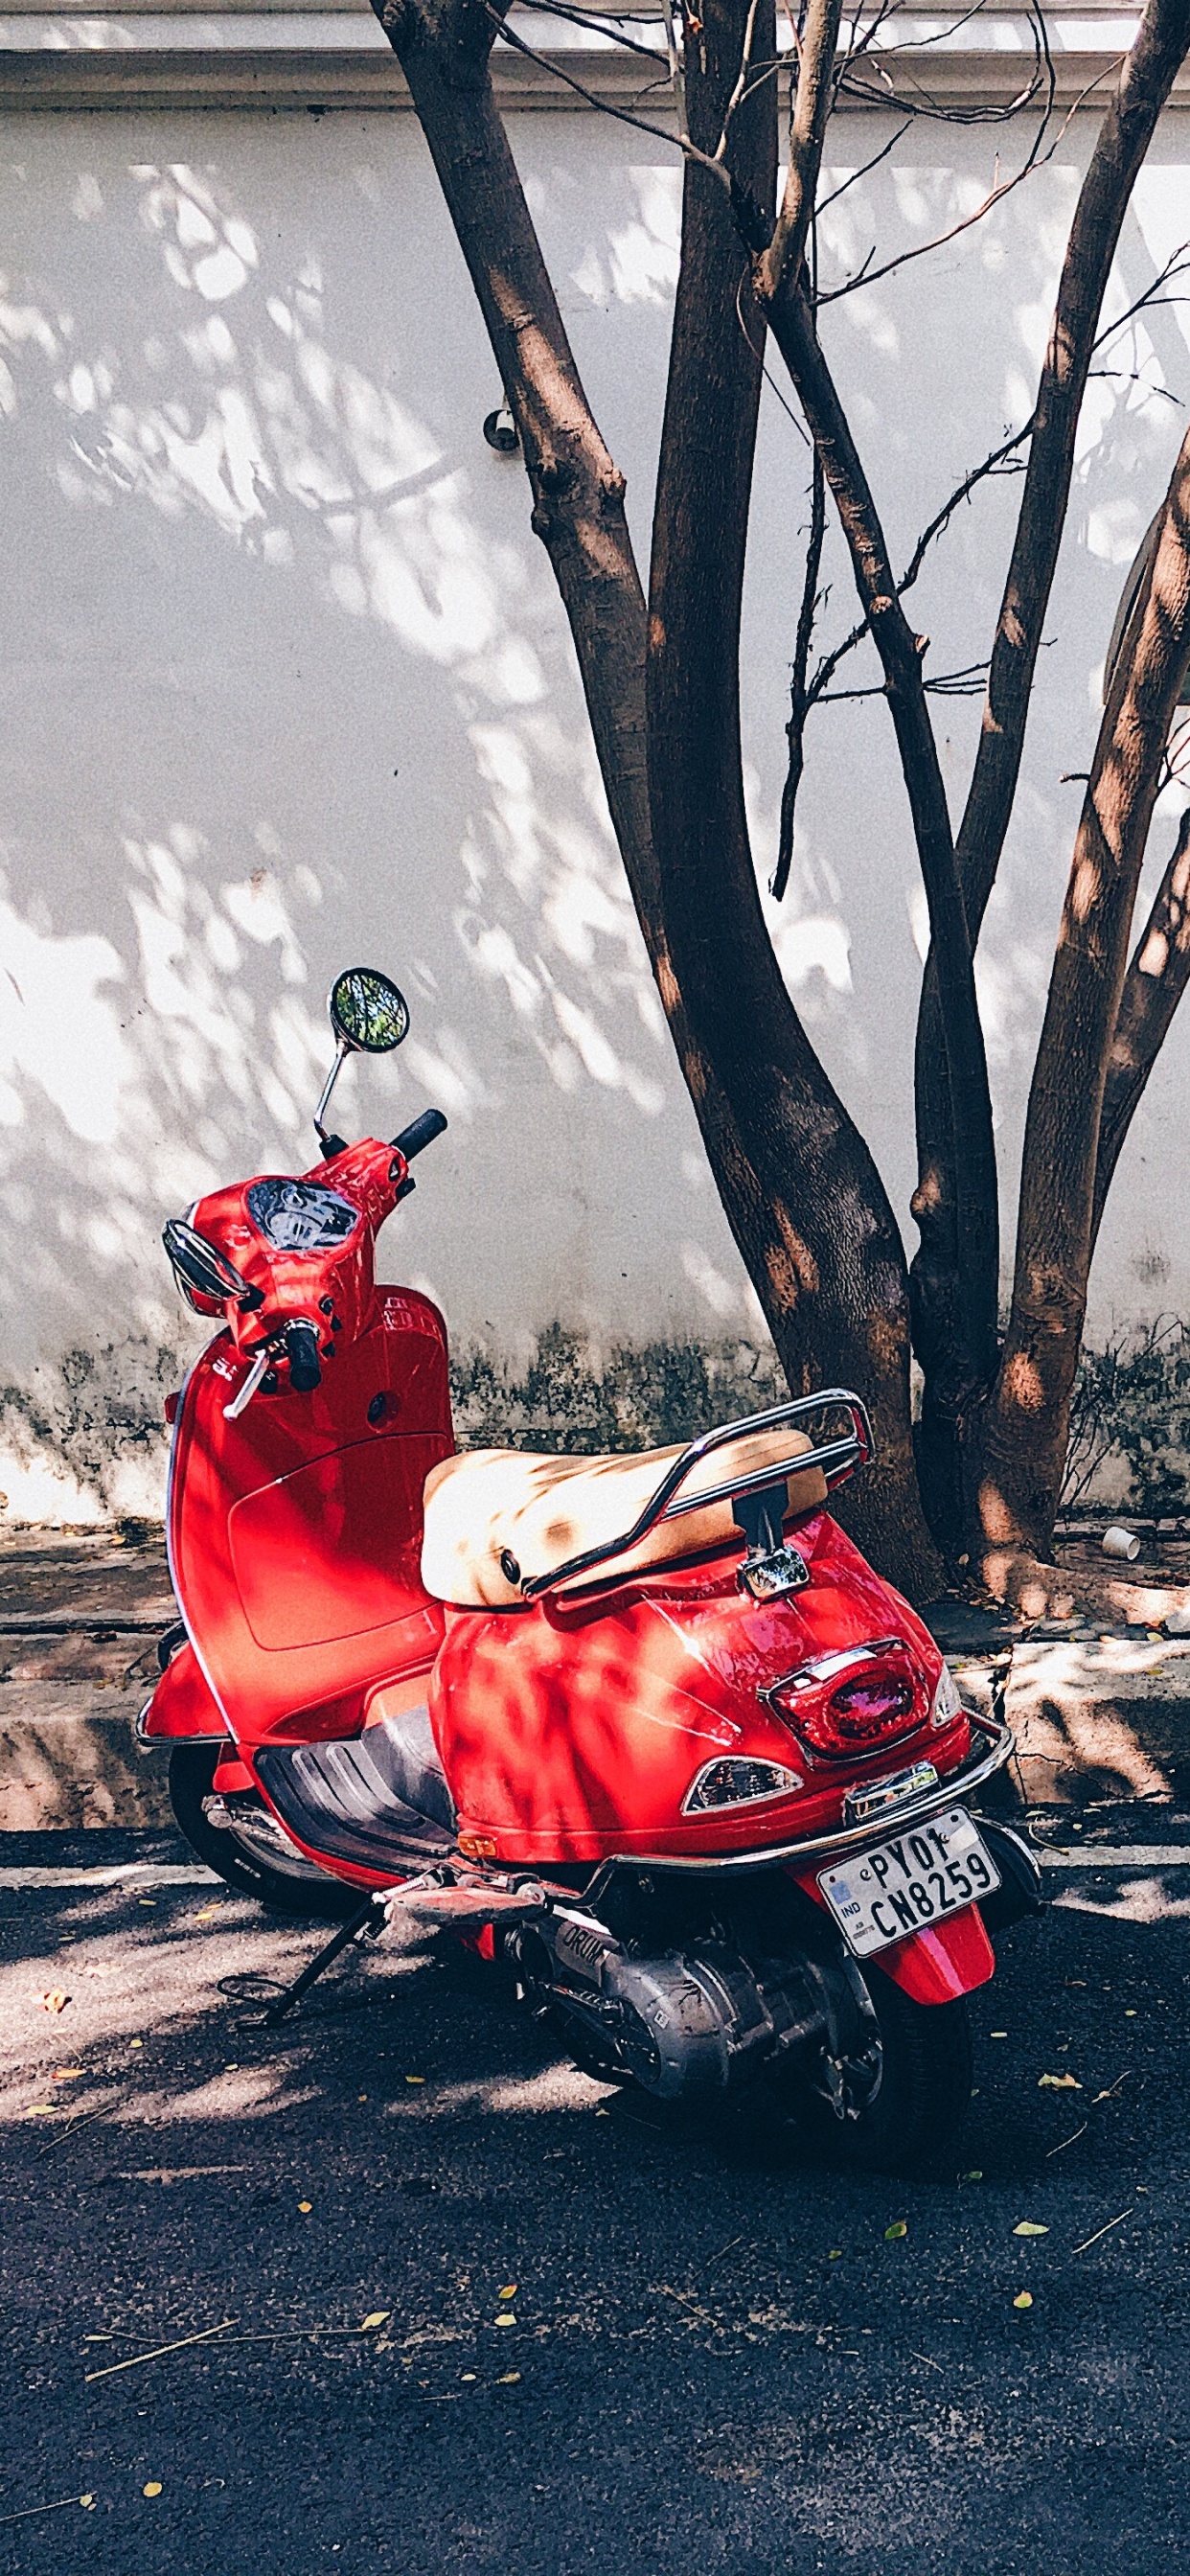 Man in Red Jacket Riding Red Motor Scooter on Road During Daytime. Wallpaper in 1242x2688 Resolution